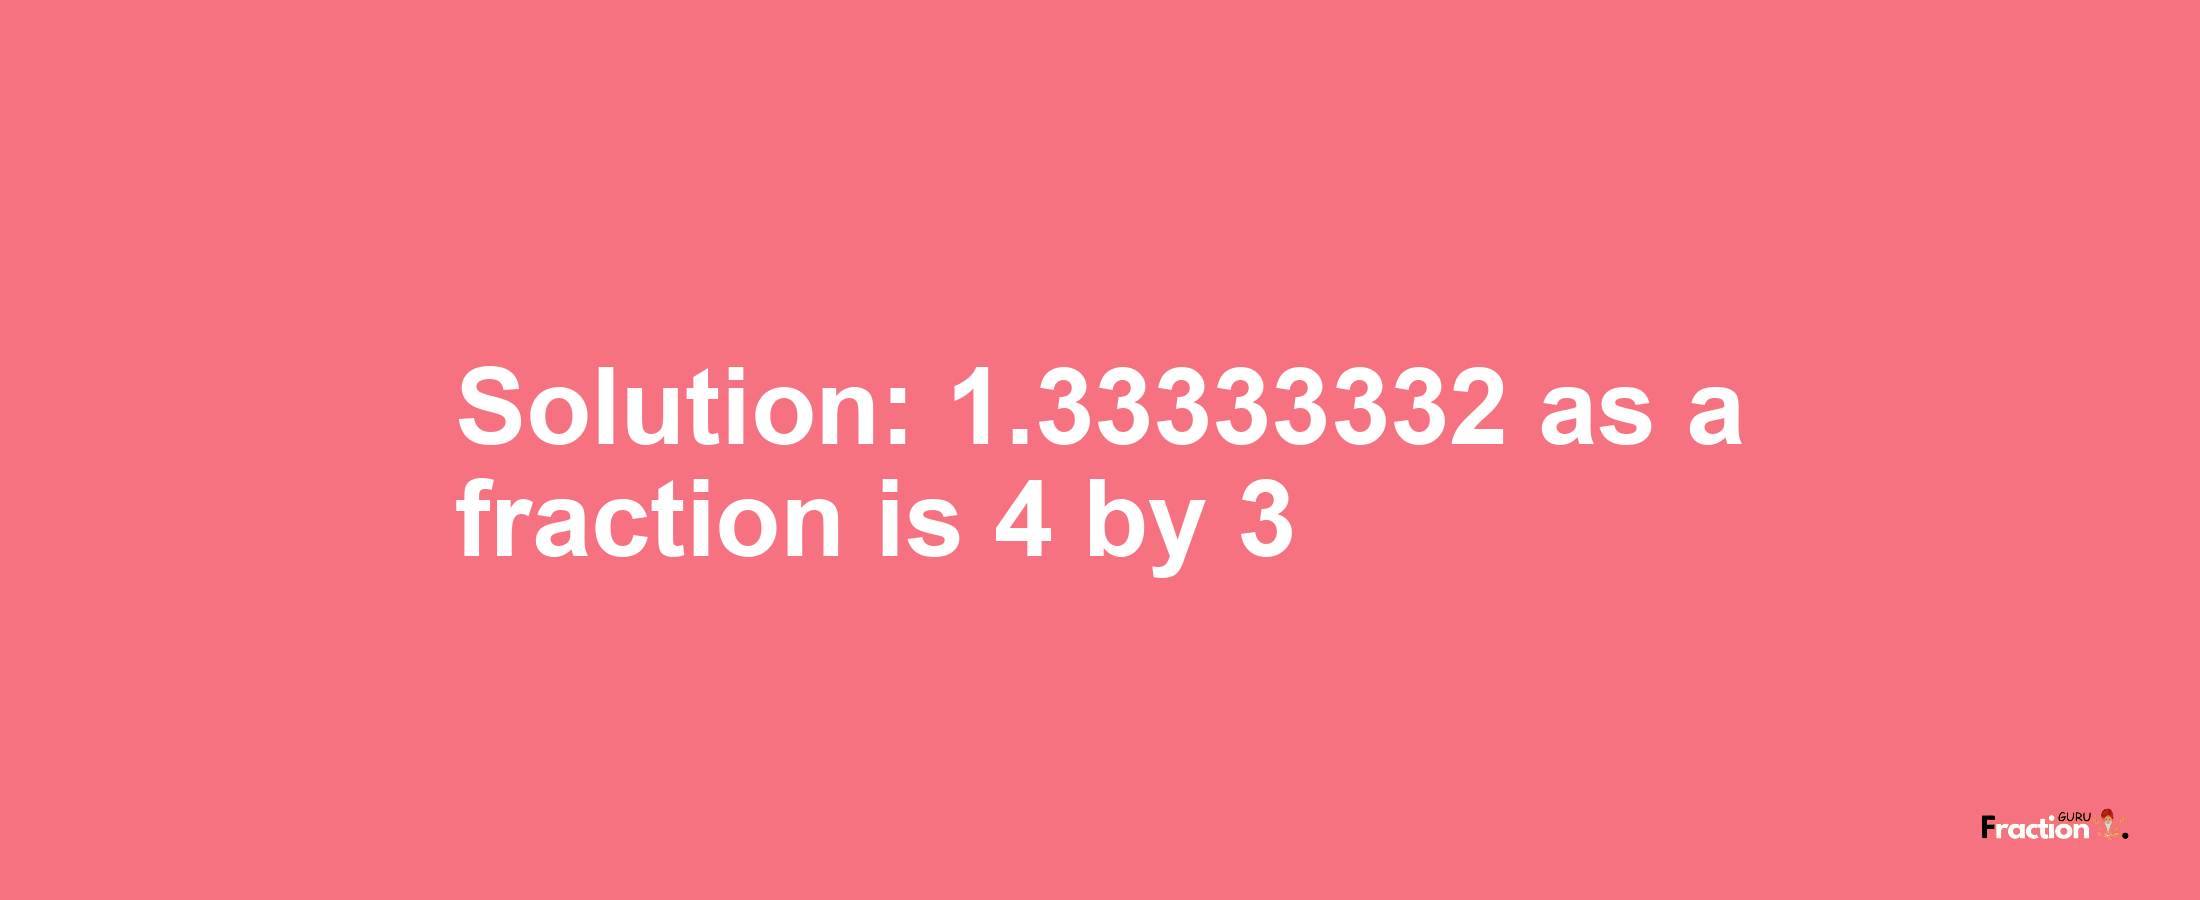 Solution:1.33333332 as a fraction is 4/3